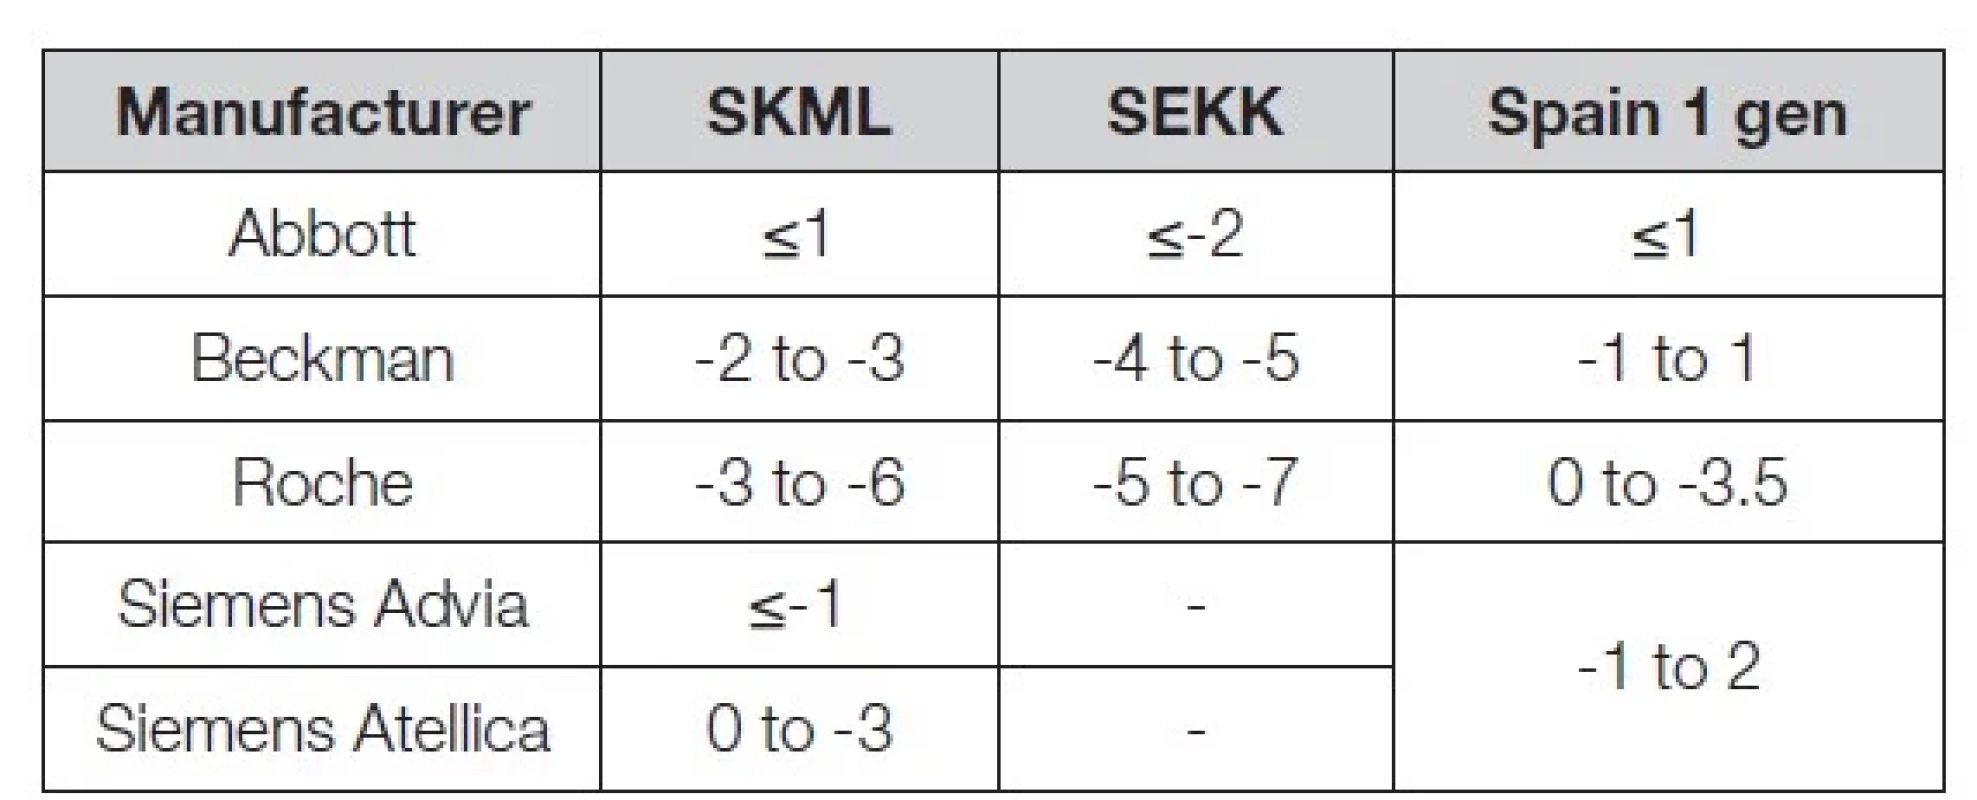 The bias of chloride values in control samples EQAS
SKML (NL), SEKK (CZ) in 2019-2021 and in commutable samples
(Spain 1 gen) 2015-2016.